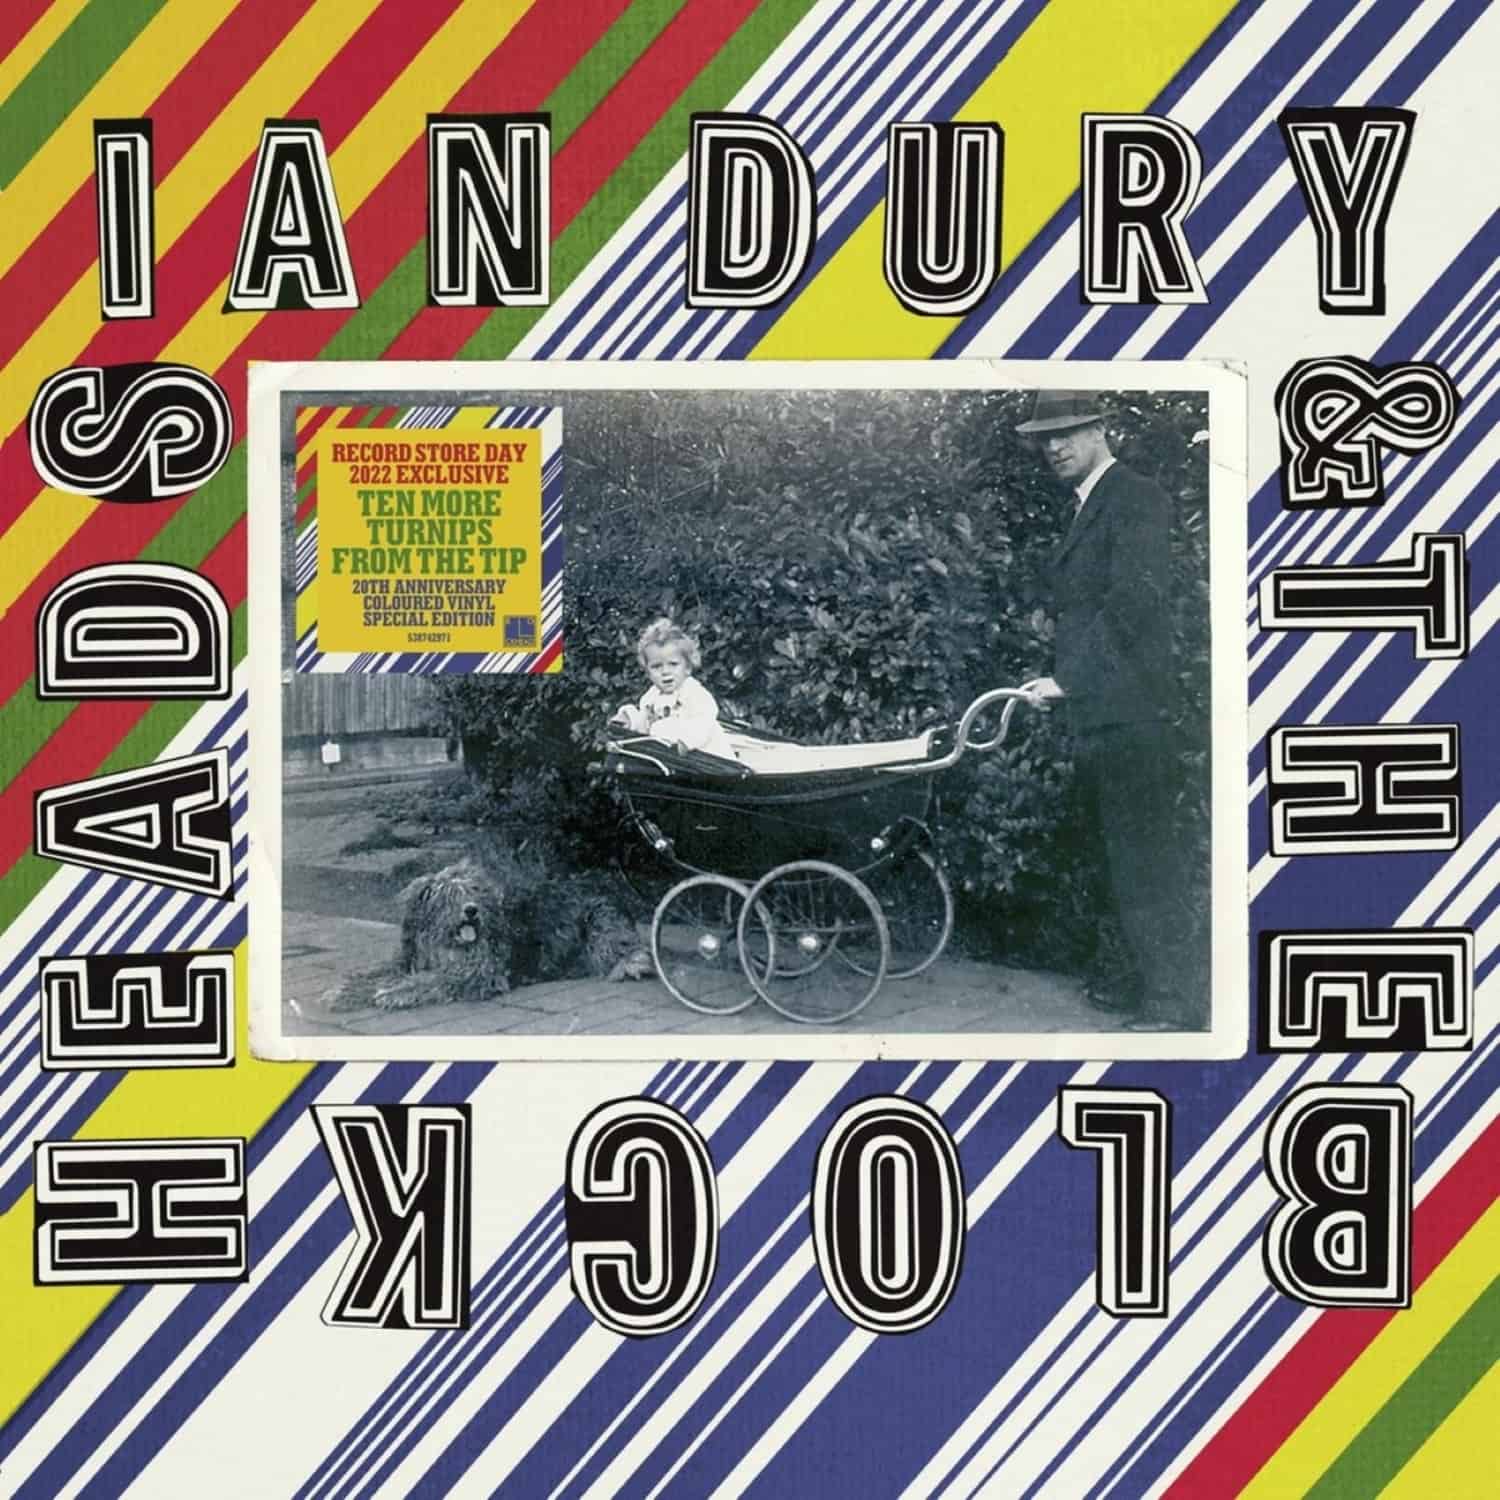 Ian Dury & The Blockheads - TEN MORE TURNIPS FROM THE TIP 